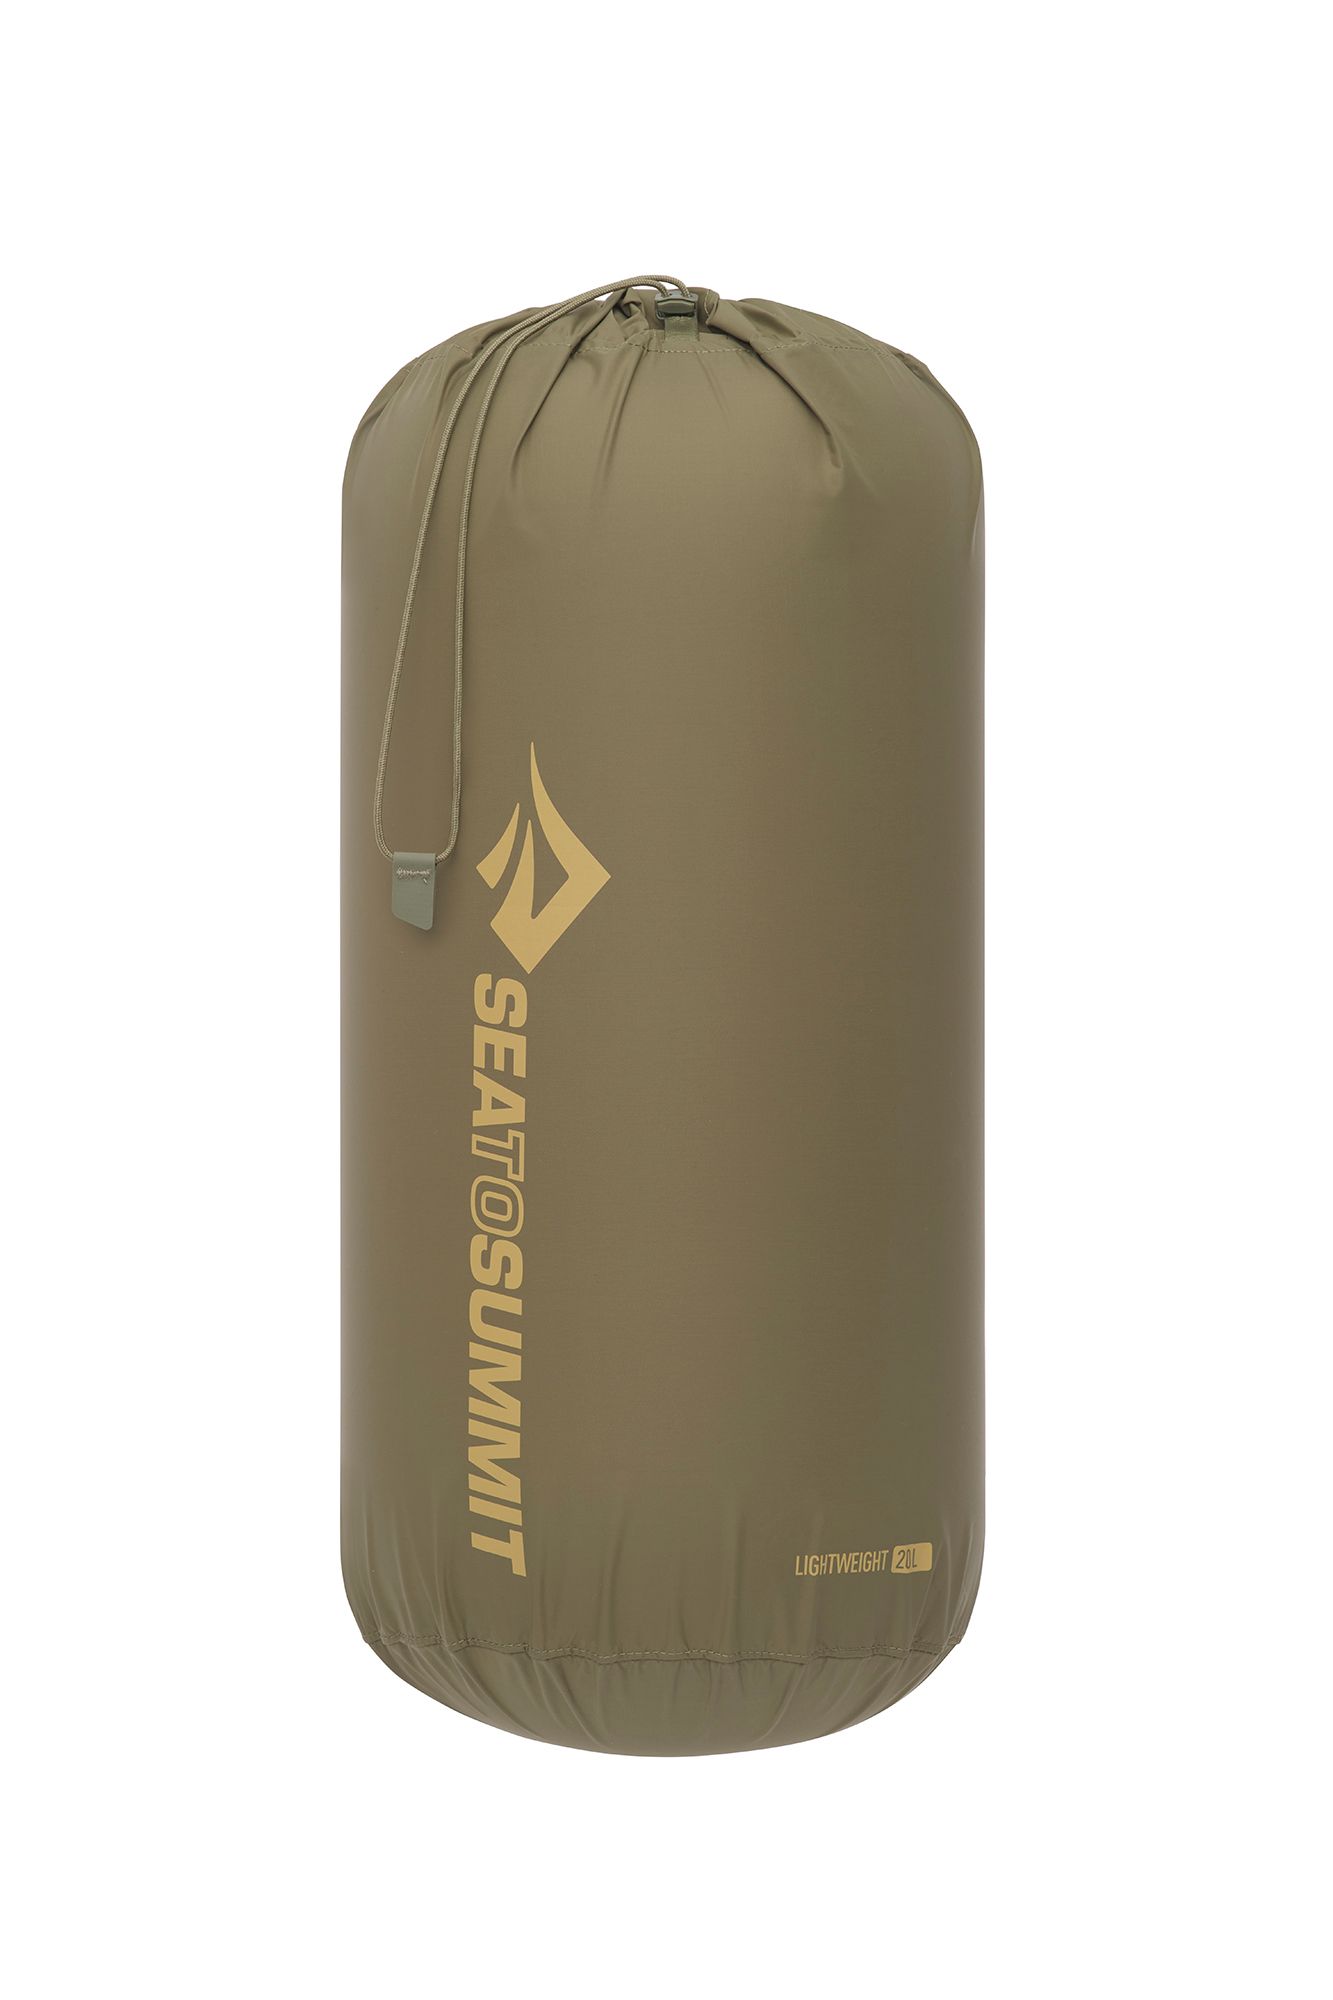 Photos - Outdoor Furniture Sea To Summit Lightweight Stuff Sack 20L, Olive 23S2SULTWGHTSTFFSCAC 